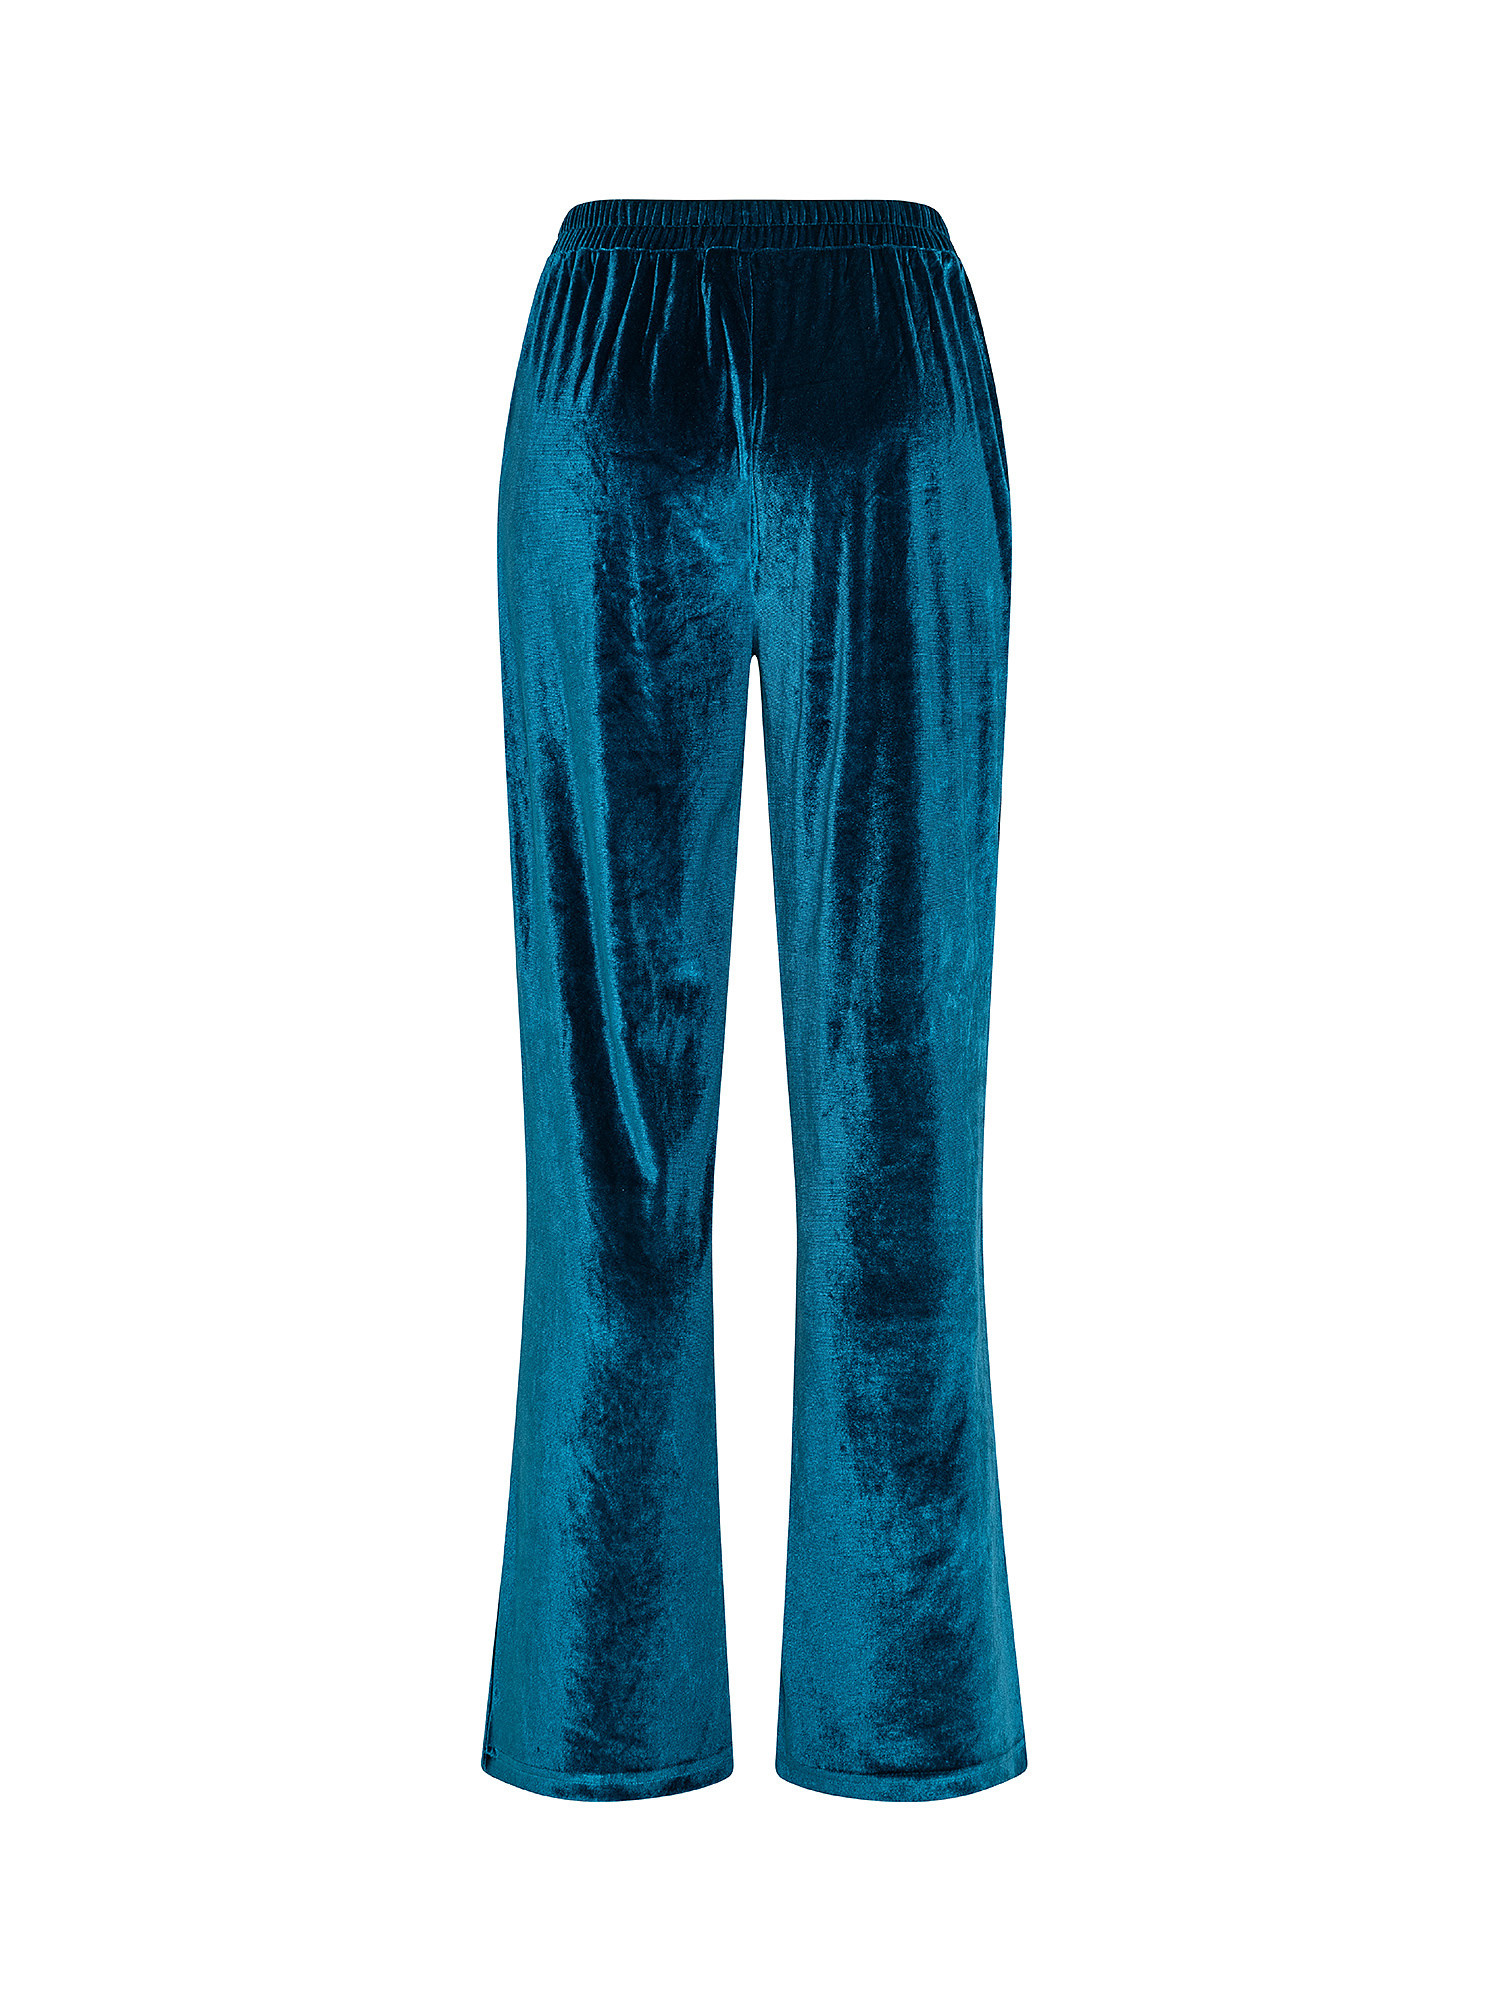 Velor trousers, Green teal, large image number 1